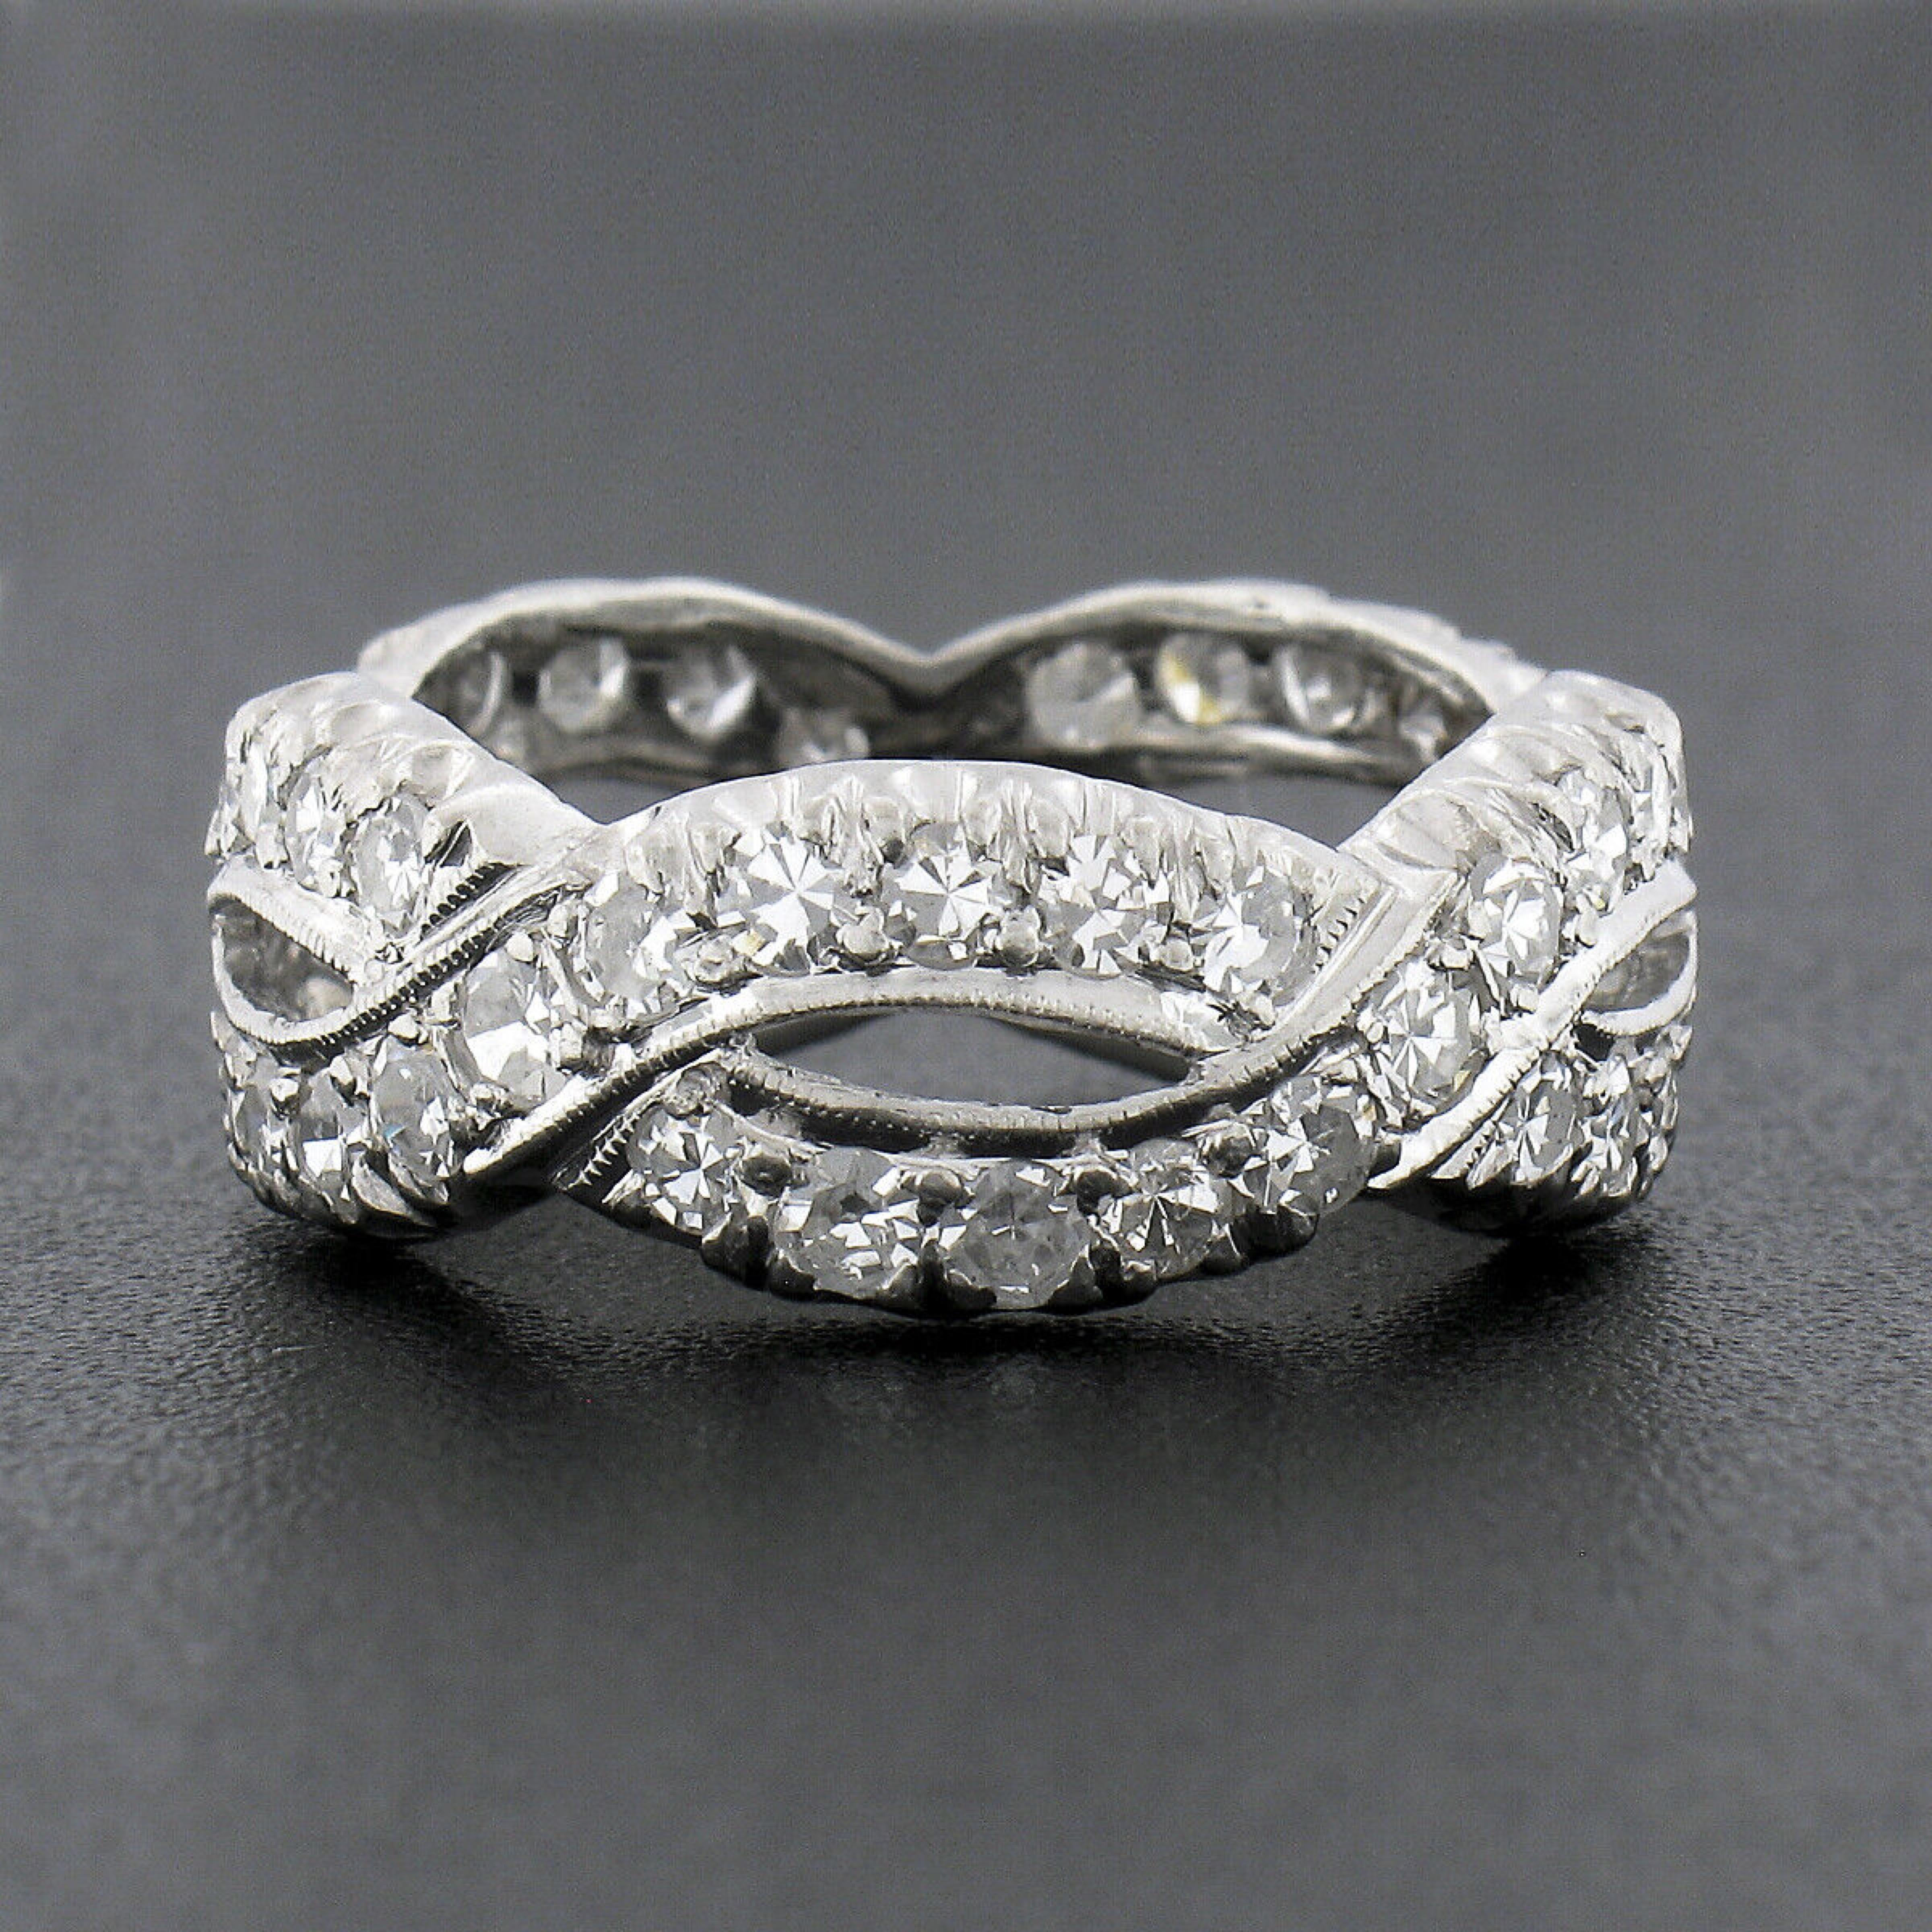 This truly breathtaking antique diamond eternity band ring was crafted during the 1940's from solid platinum and features an infinity braided design set with approximately 1.90 carats of fine quality diamonds neatly pave set throughout the entire